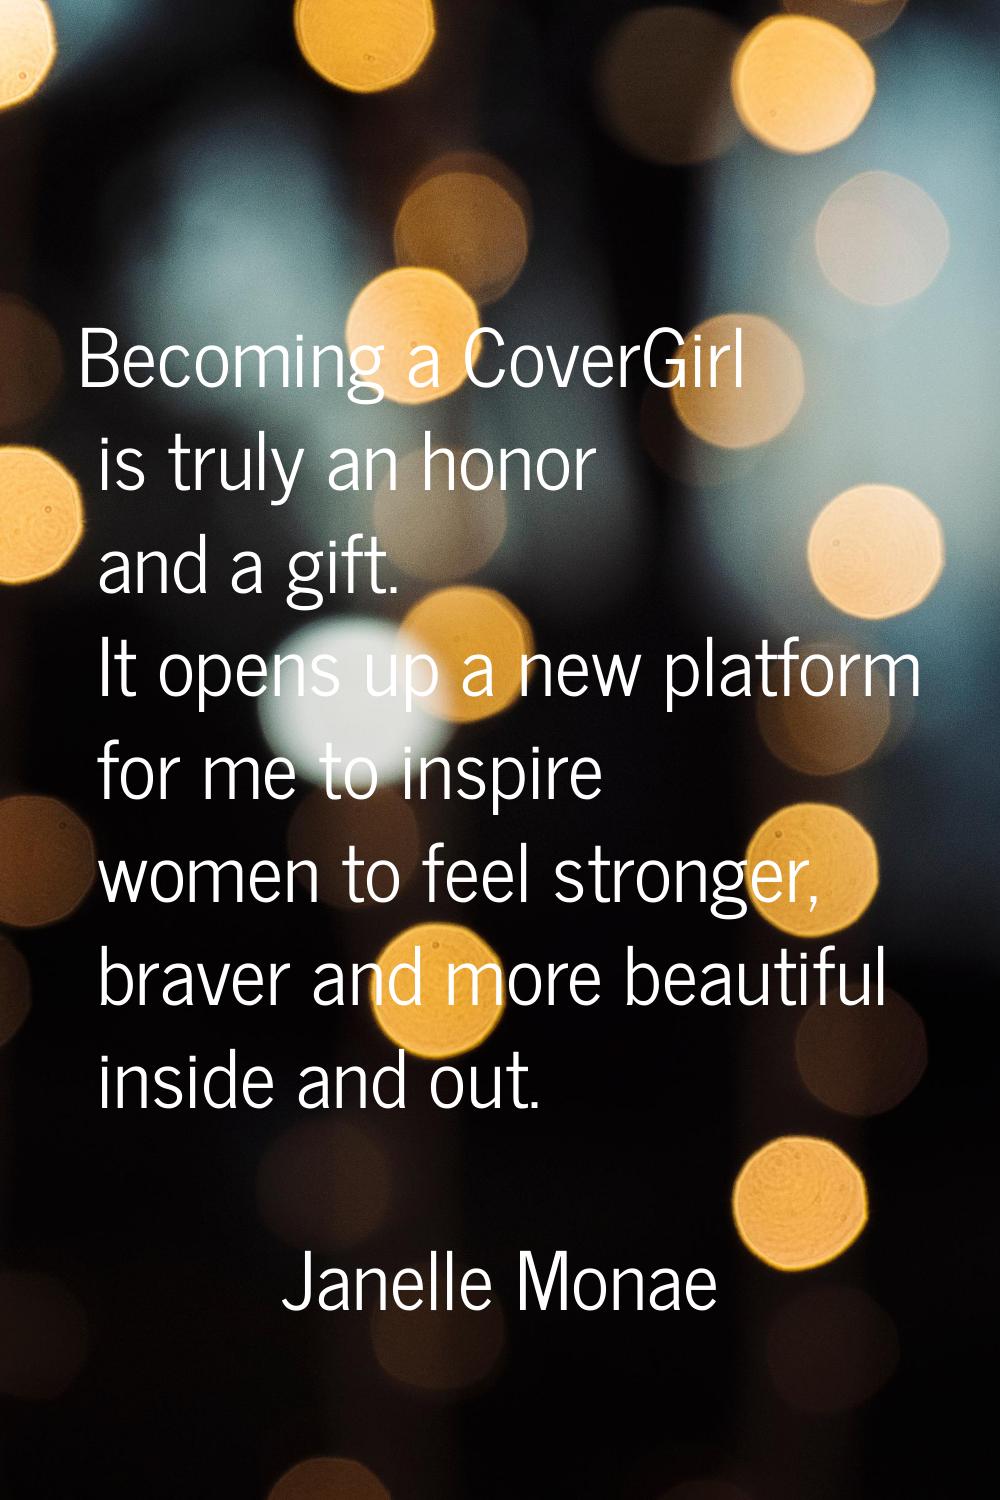 Becoming a CoverGirl is truly an honor and a gift. It opens up a new platform for me to inspire wom